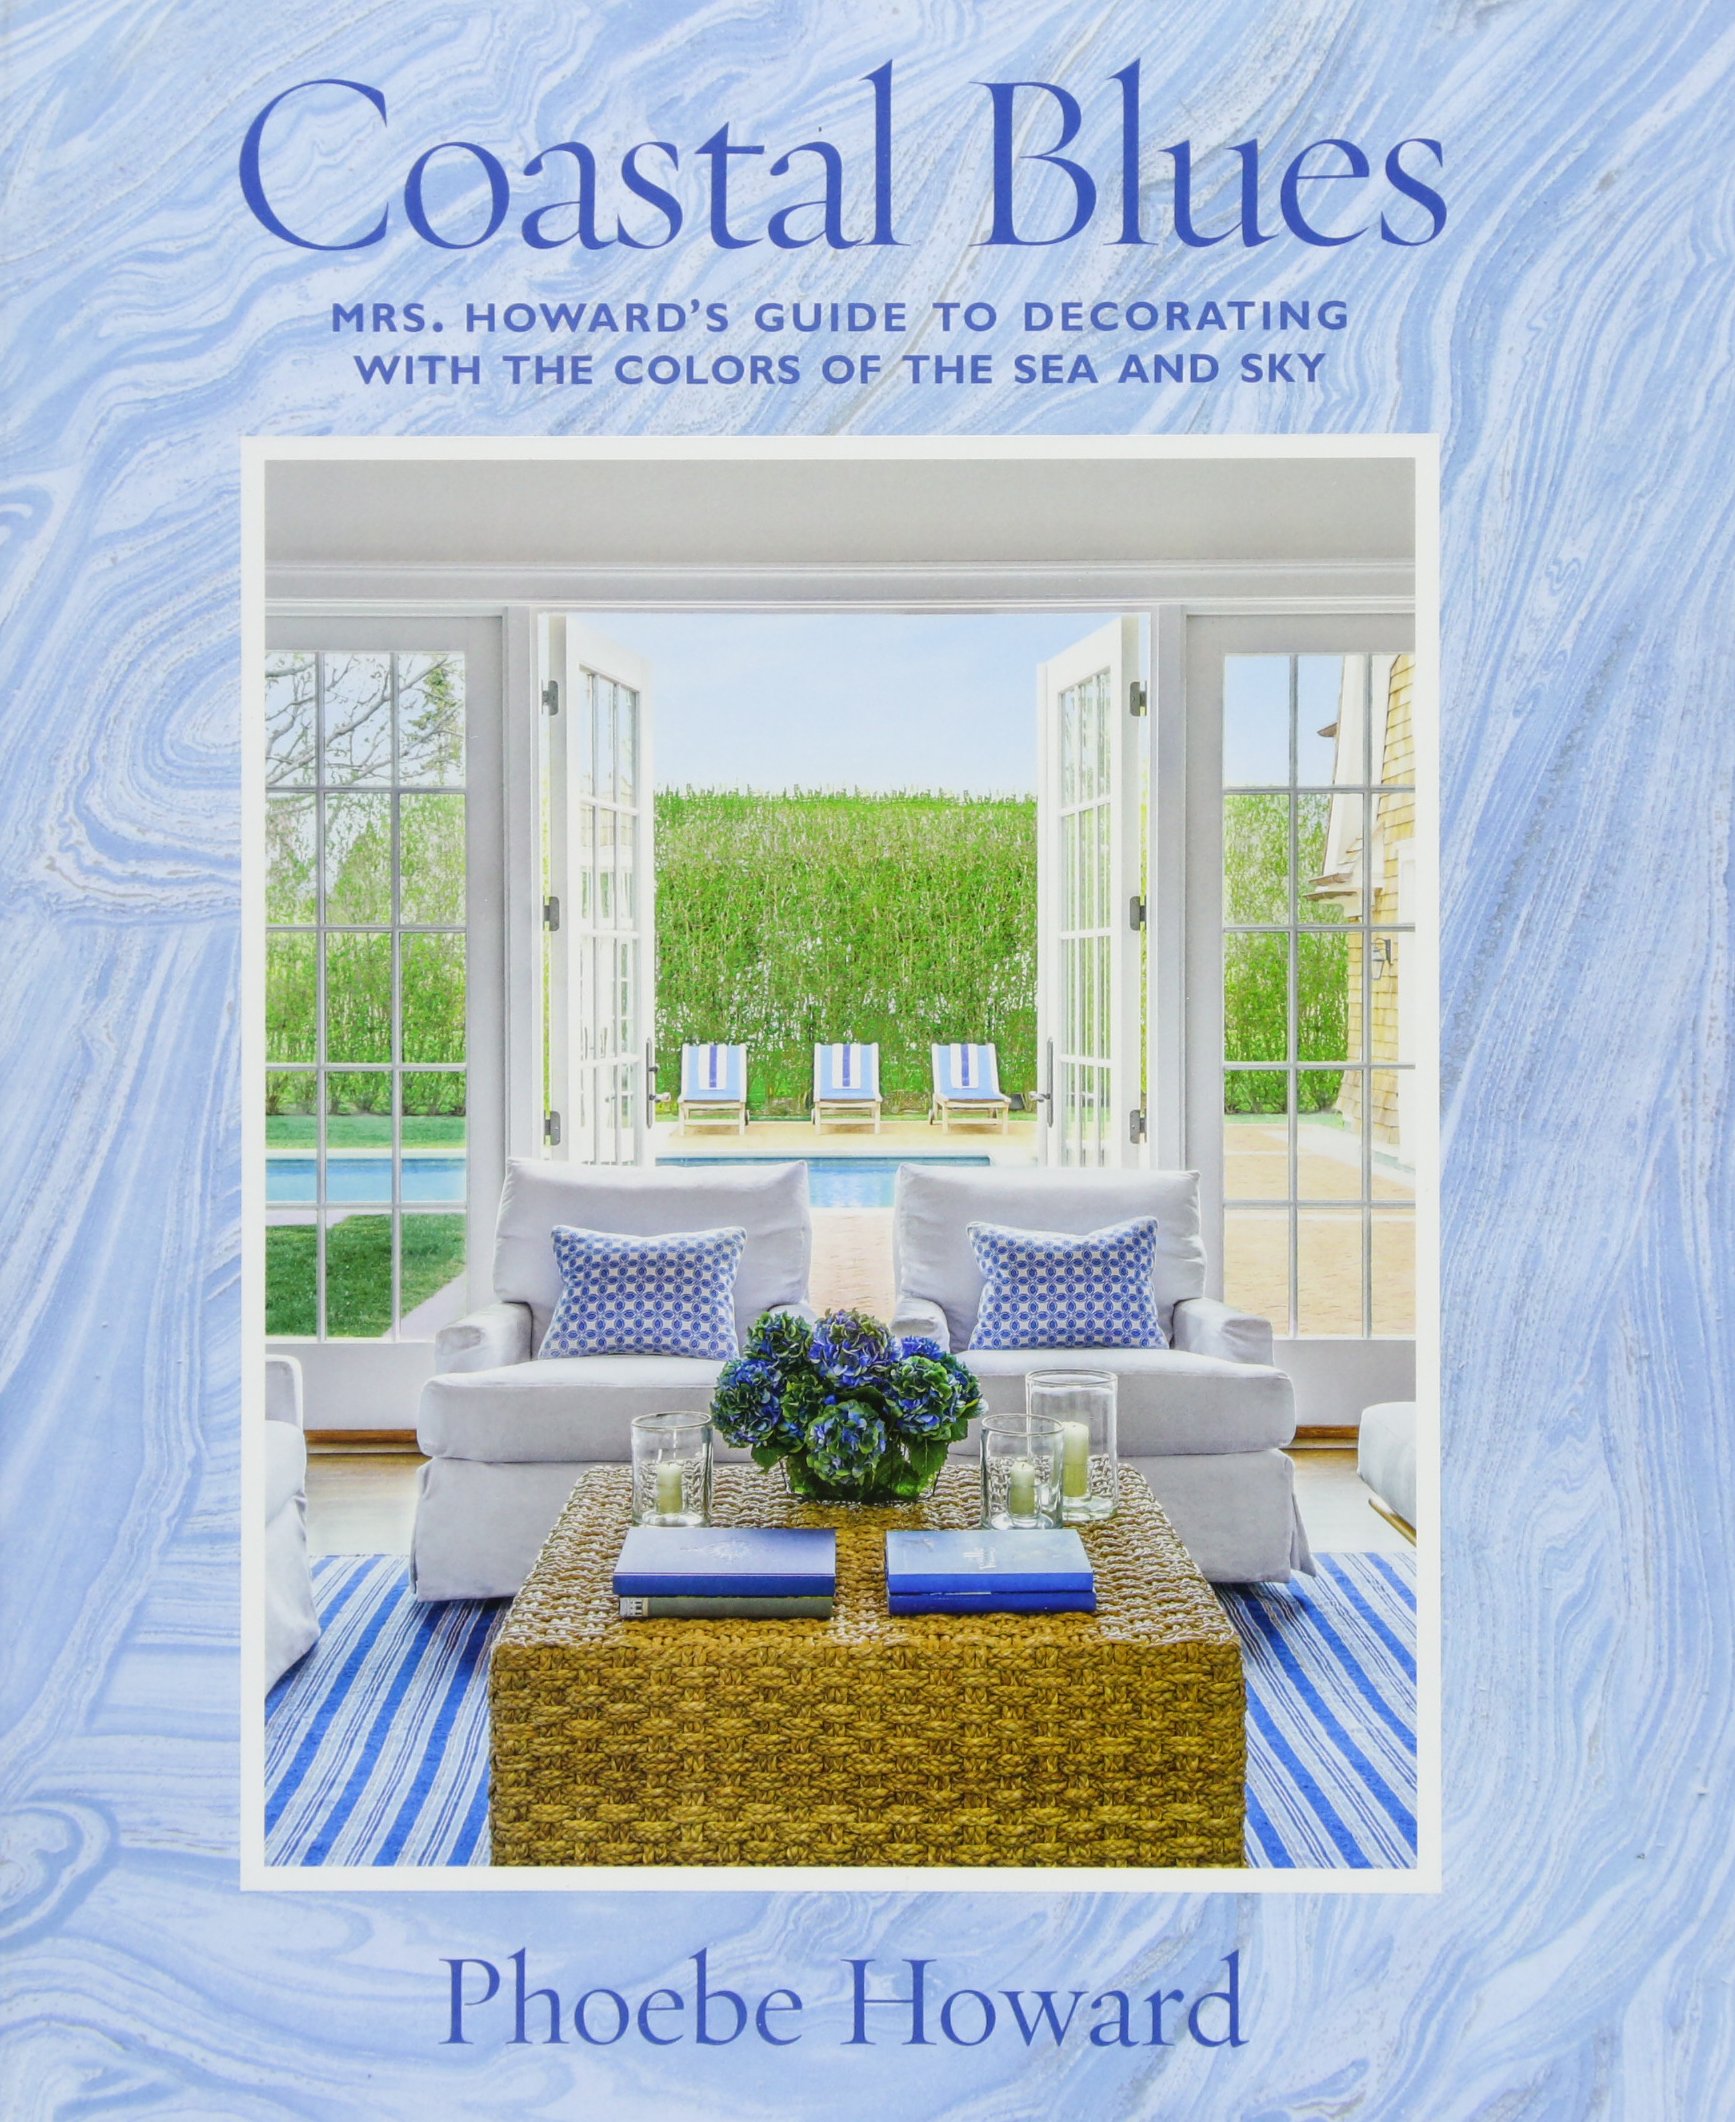 The Coffee Table Books I Love and Use for Styling - Color & Chic